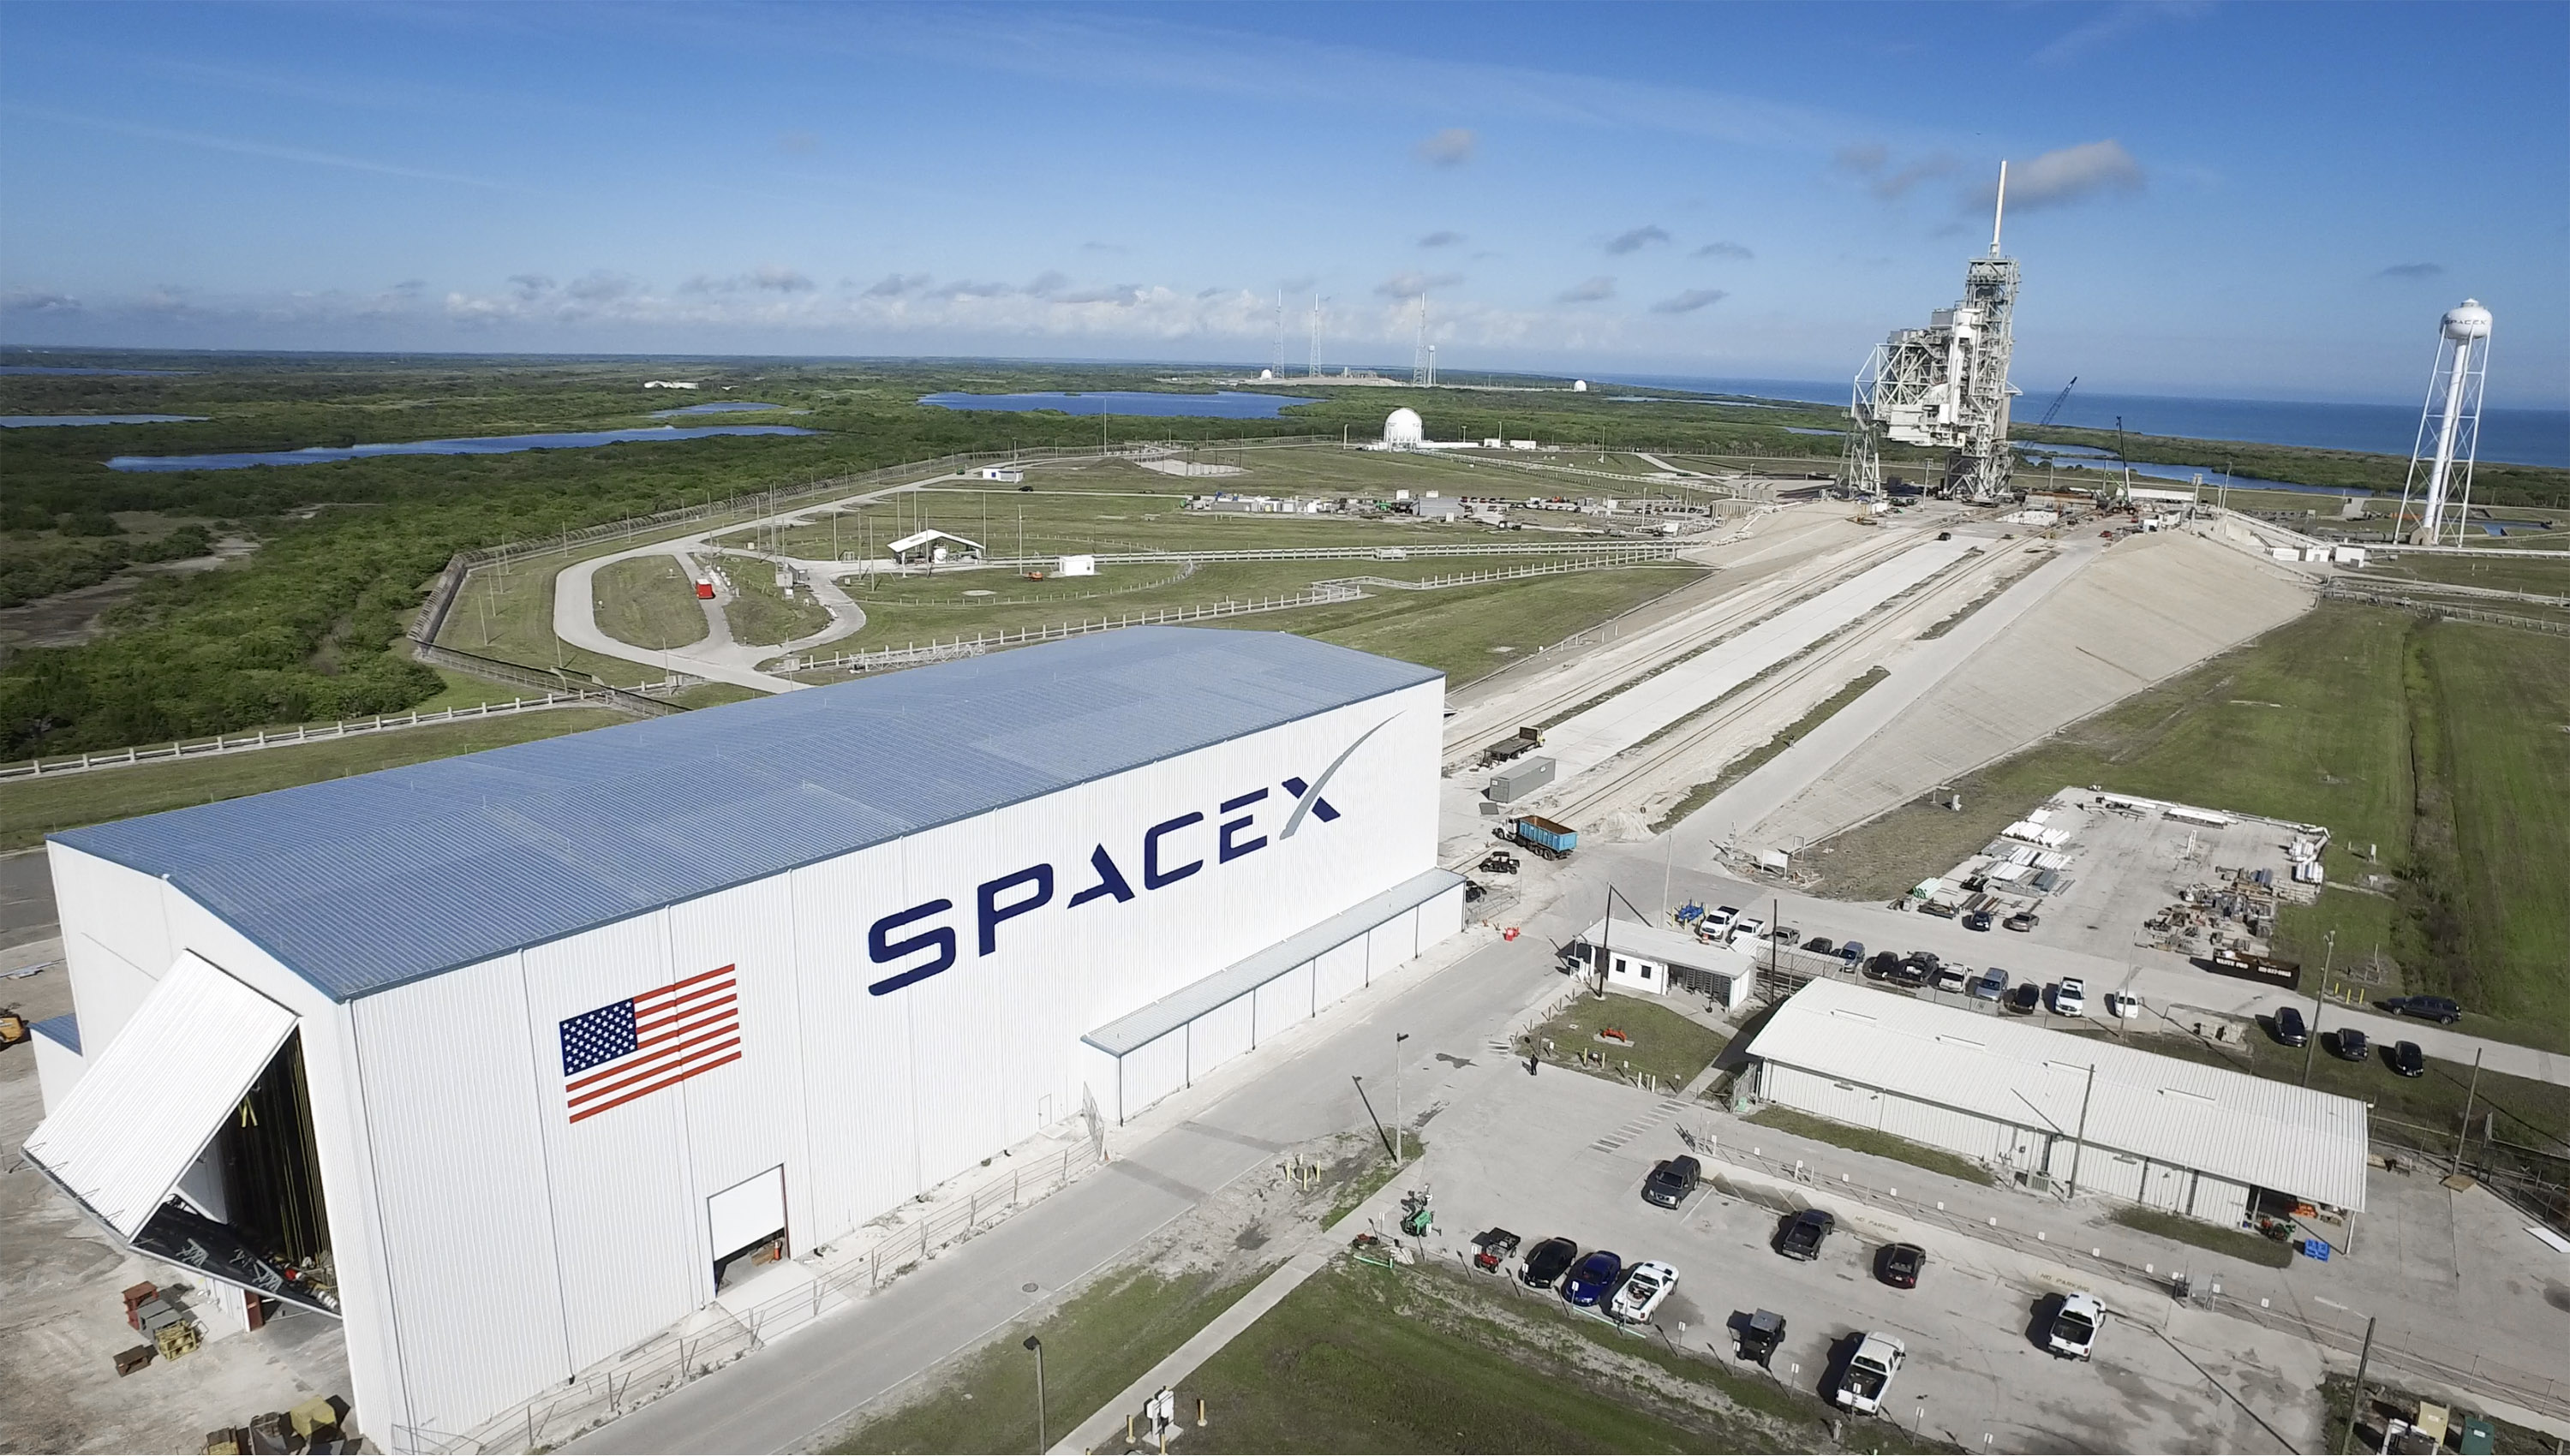 SpaceX had a big year: 2016 year in review